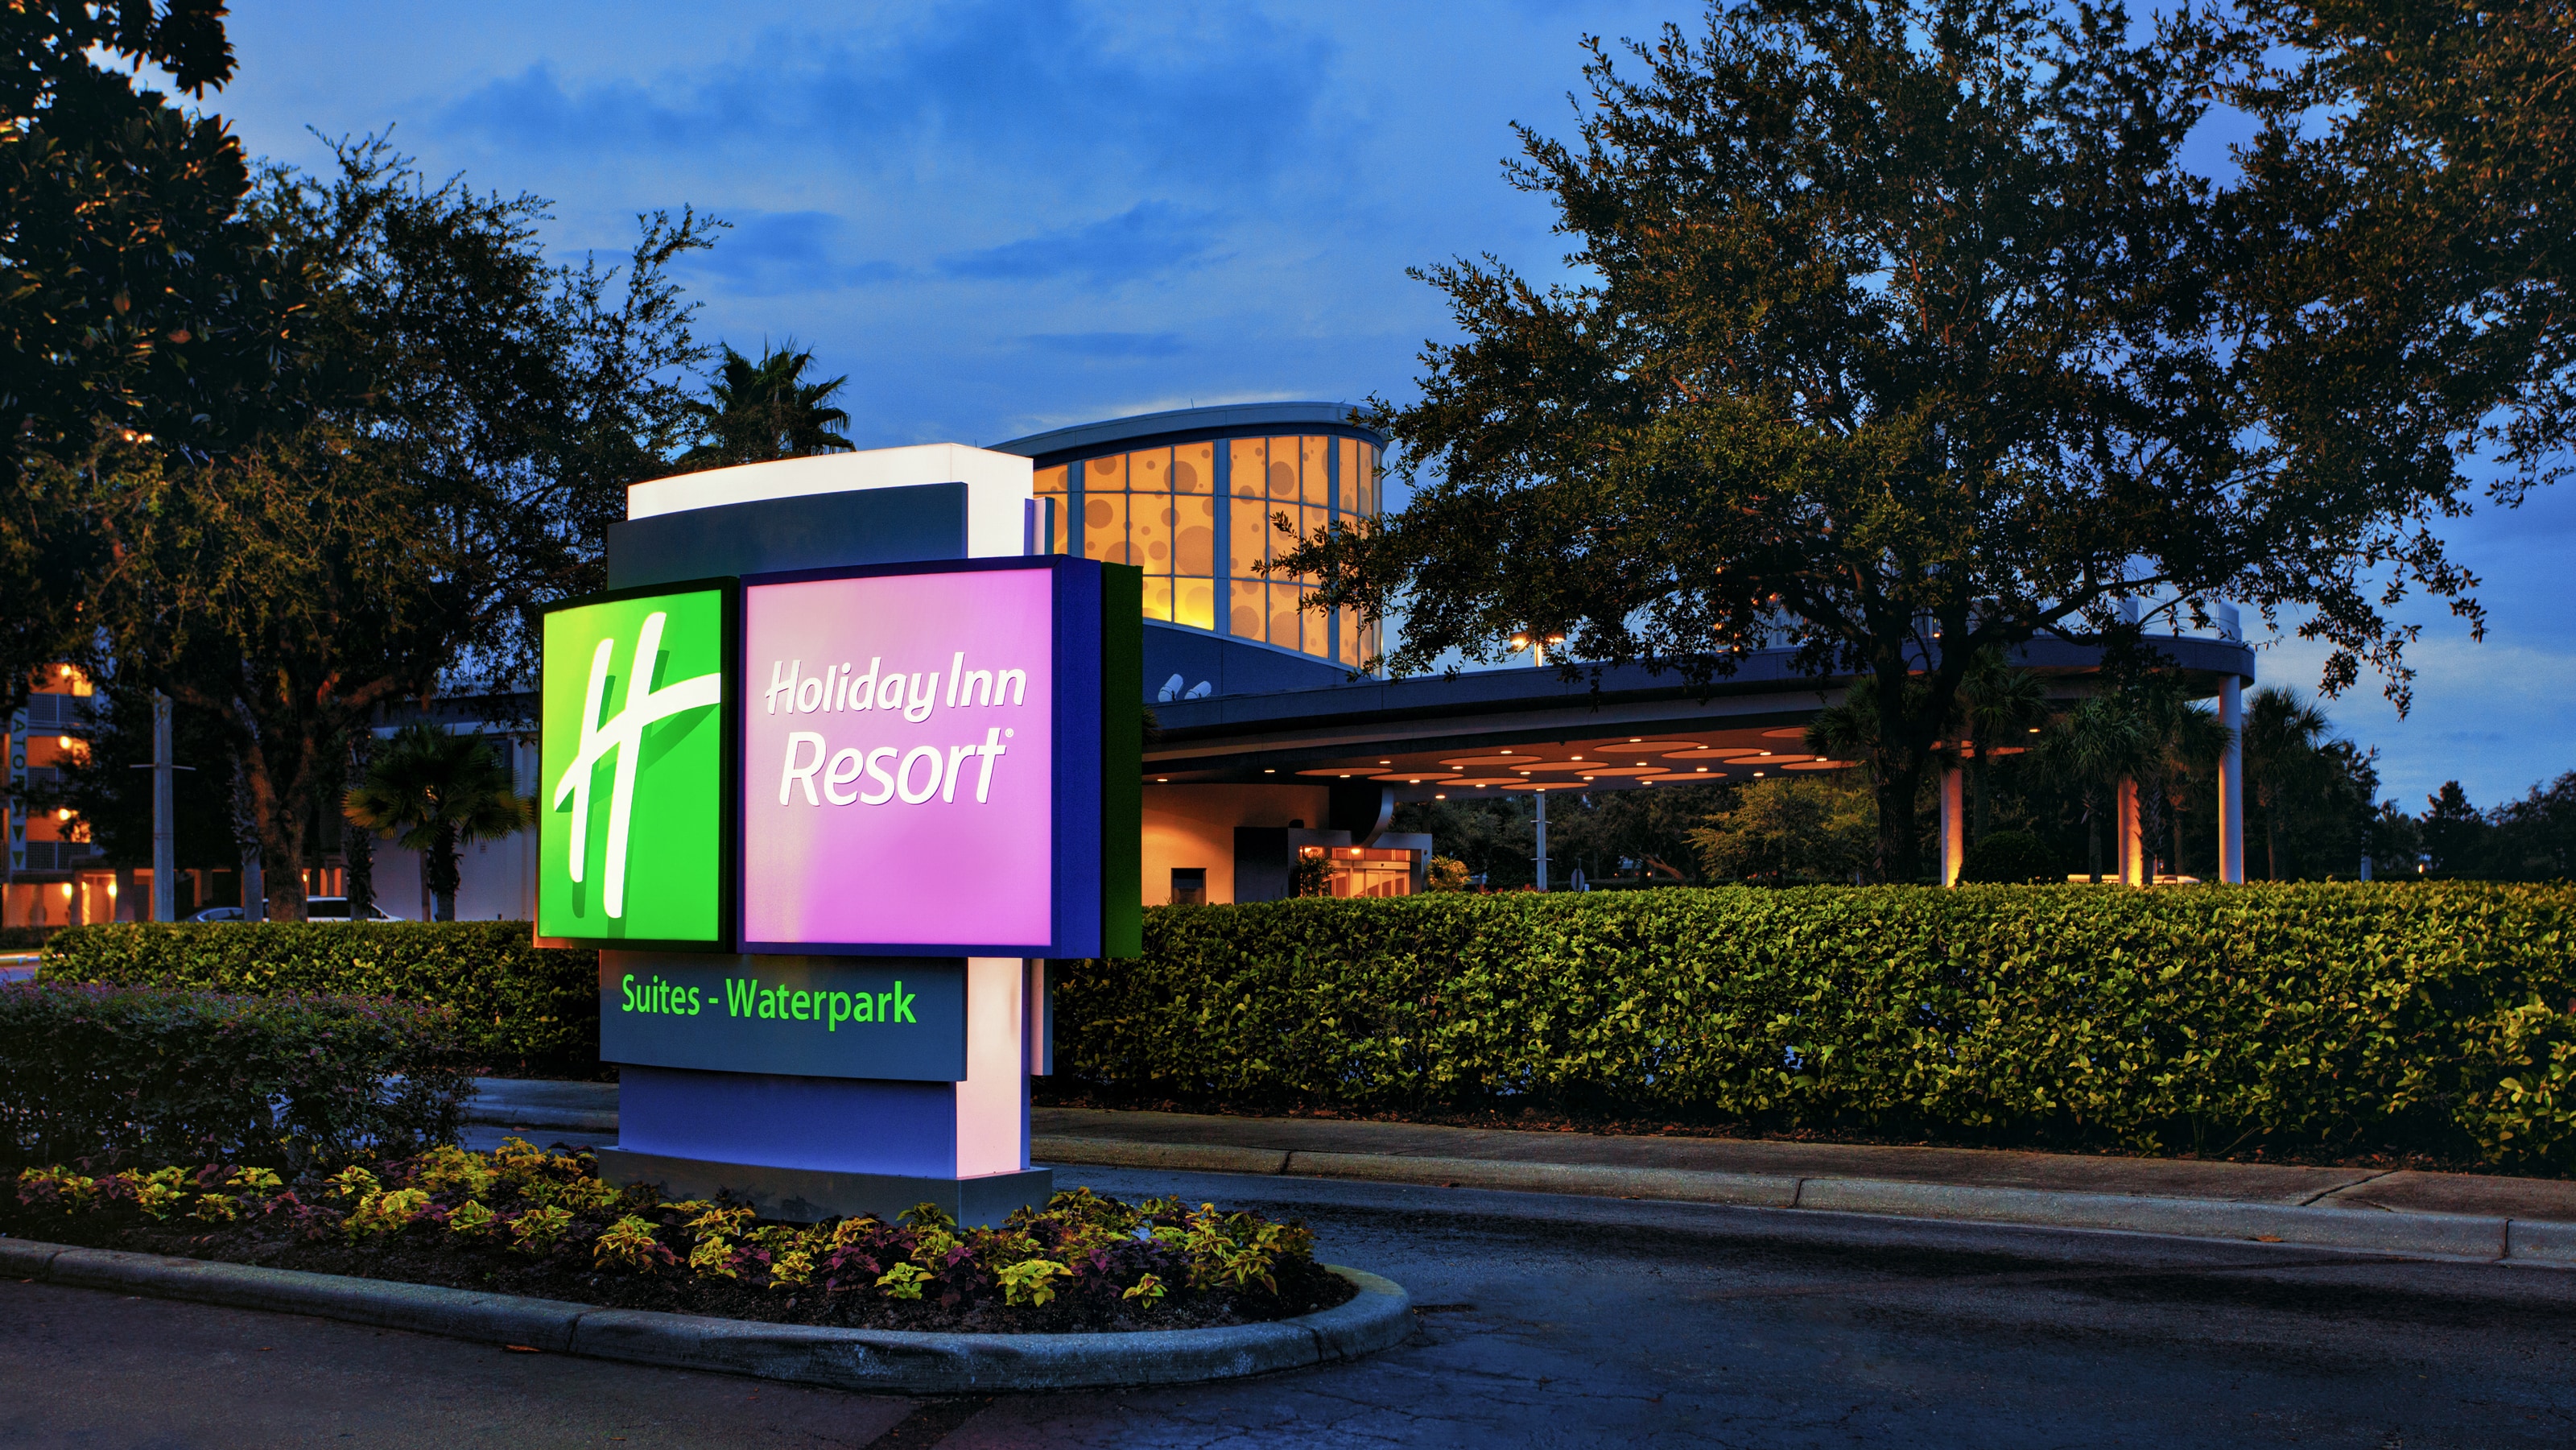 Disfs Holiday Inn Resort Orlando Suites Waterpark Front Entrance 16x9 